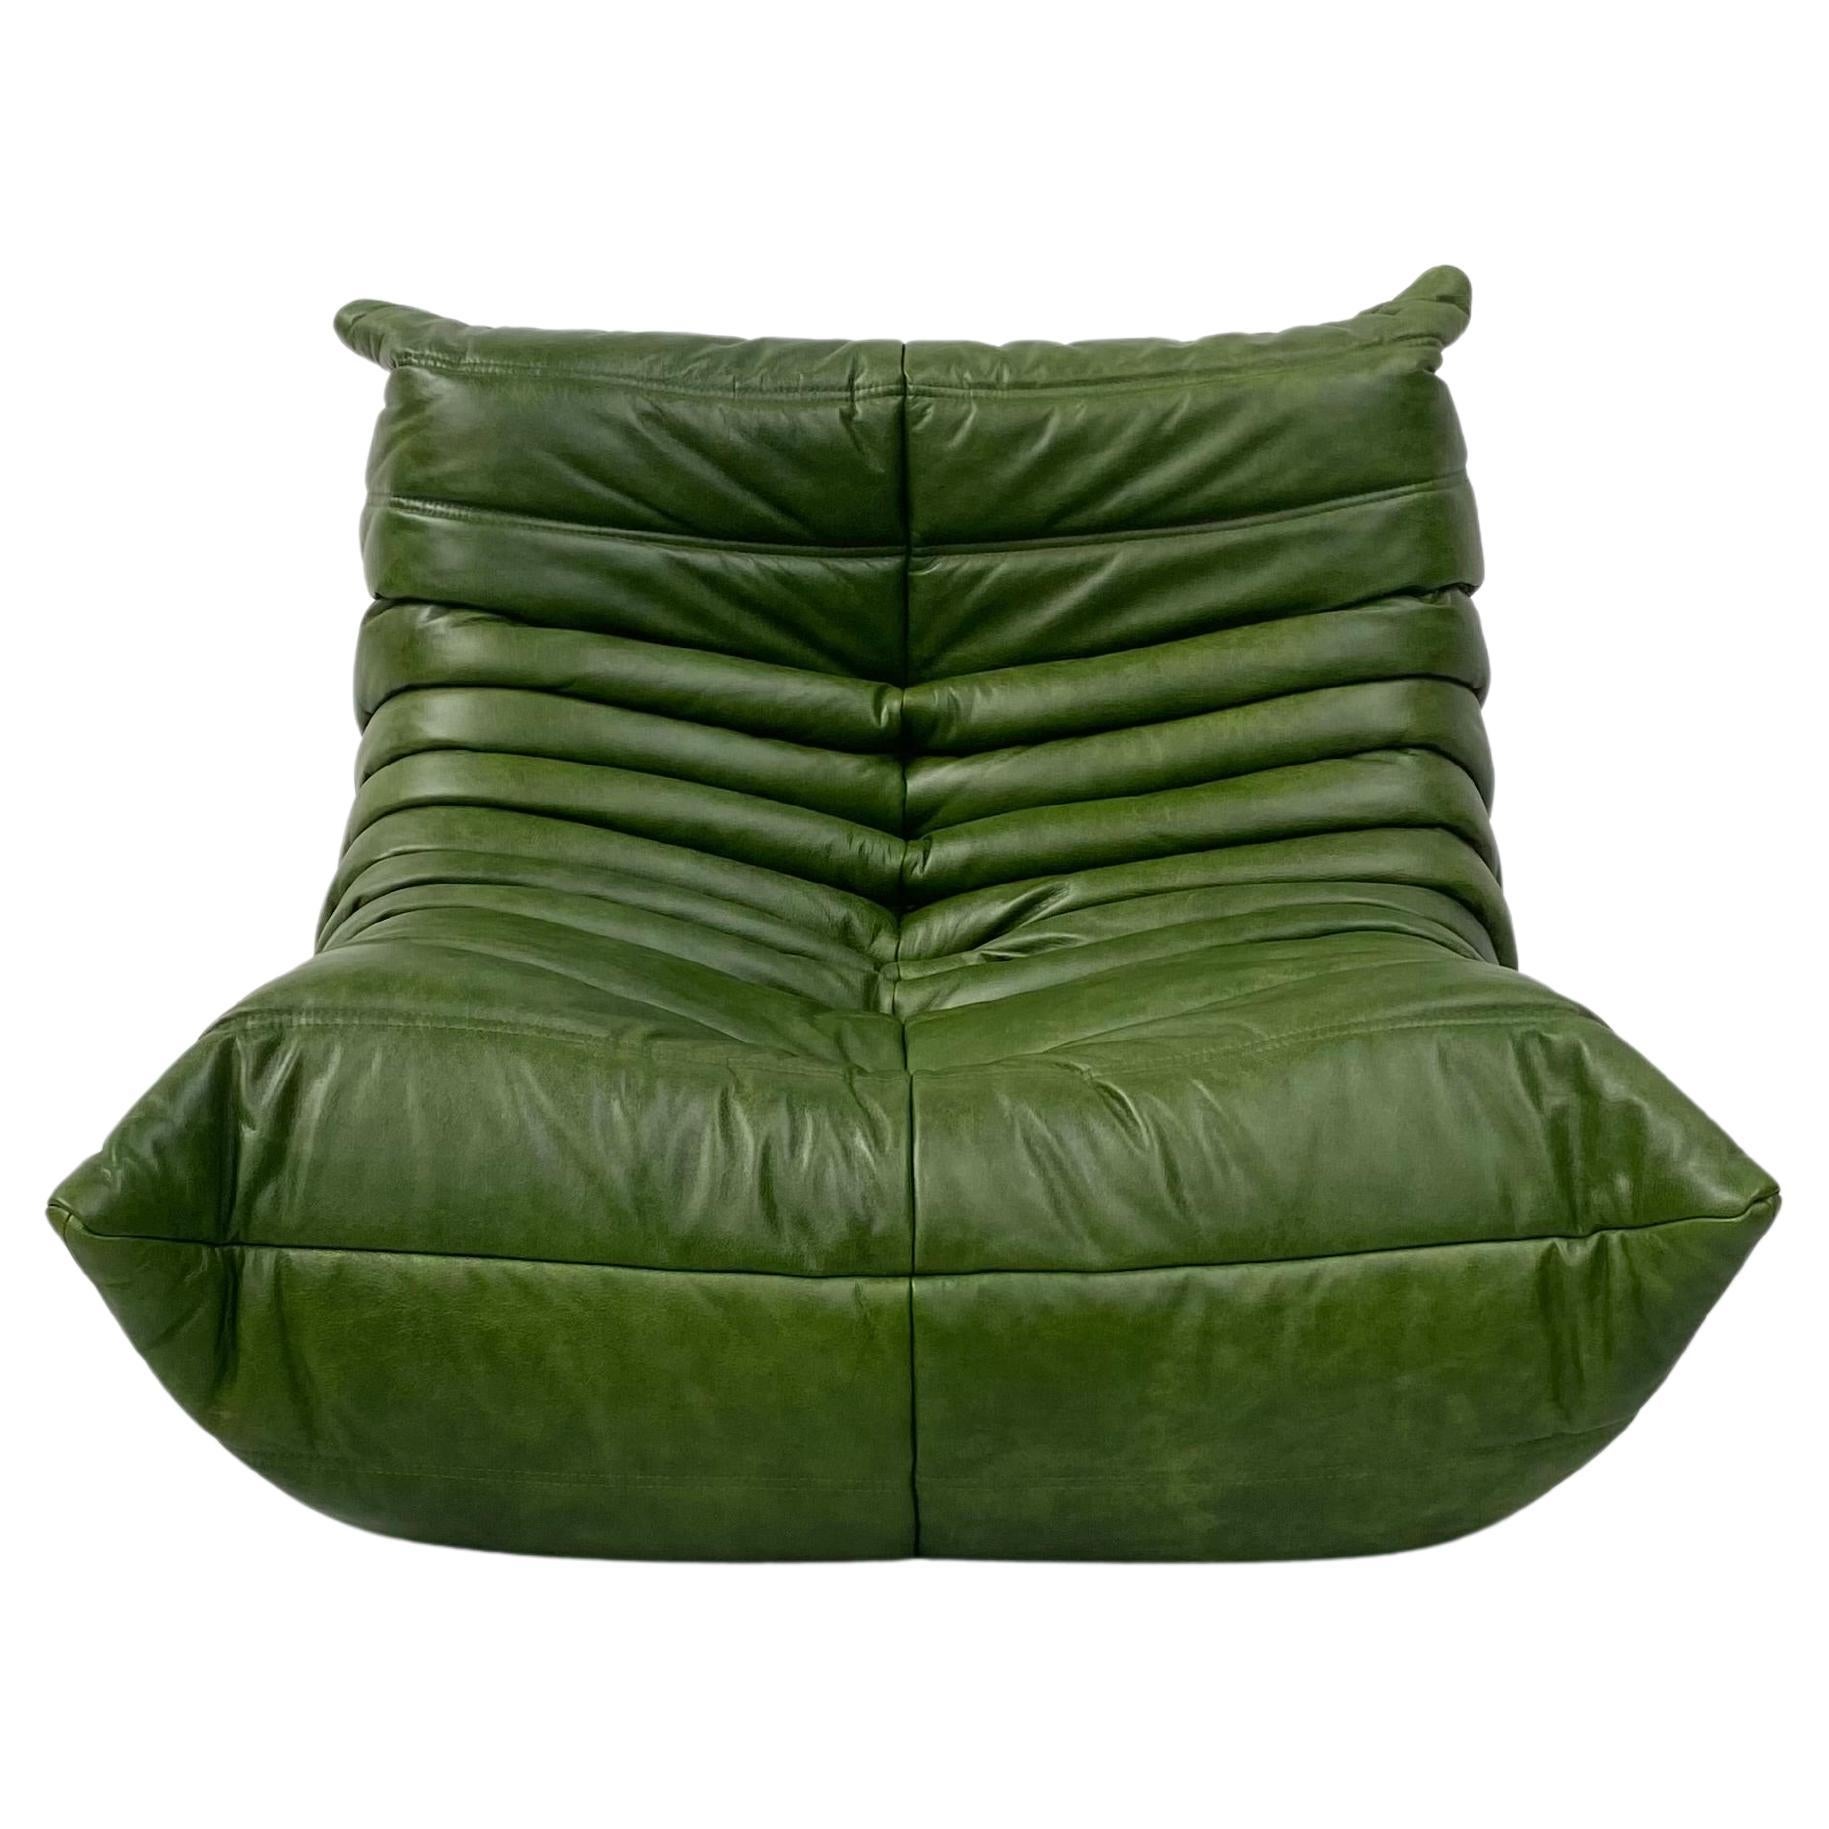 French Togo Chair in Green Leather by Michel Ducaroy for Ligne Roset, 1974. For Sale